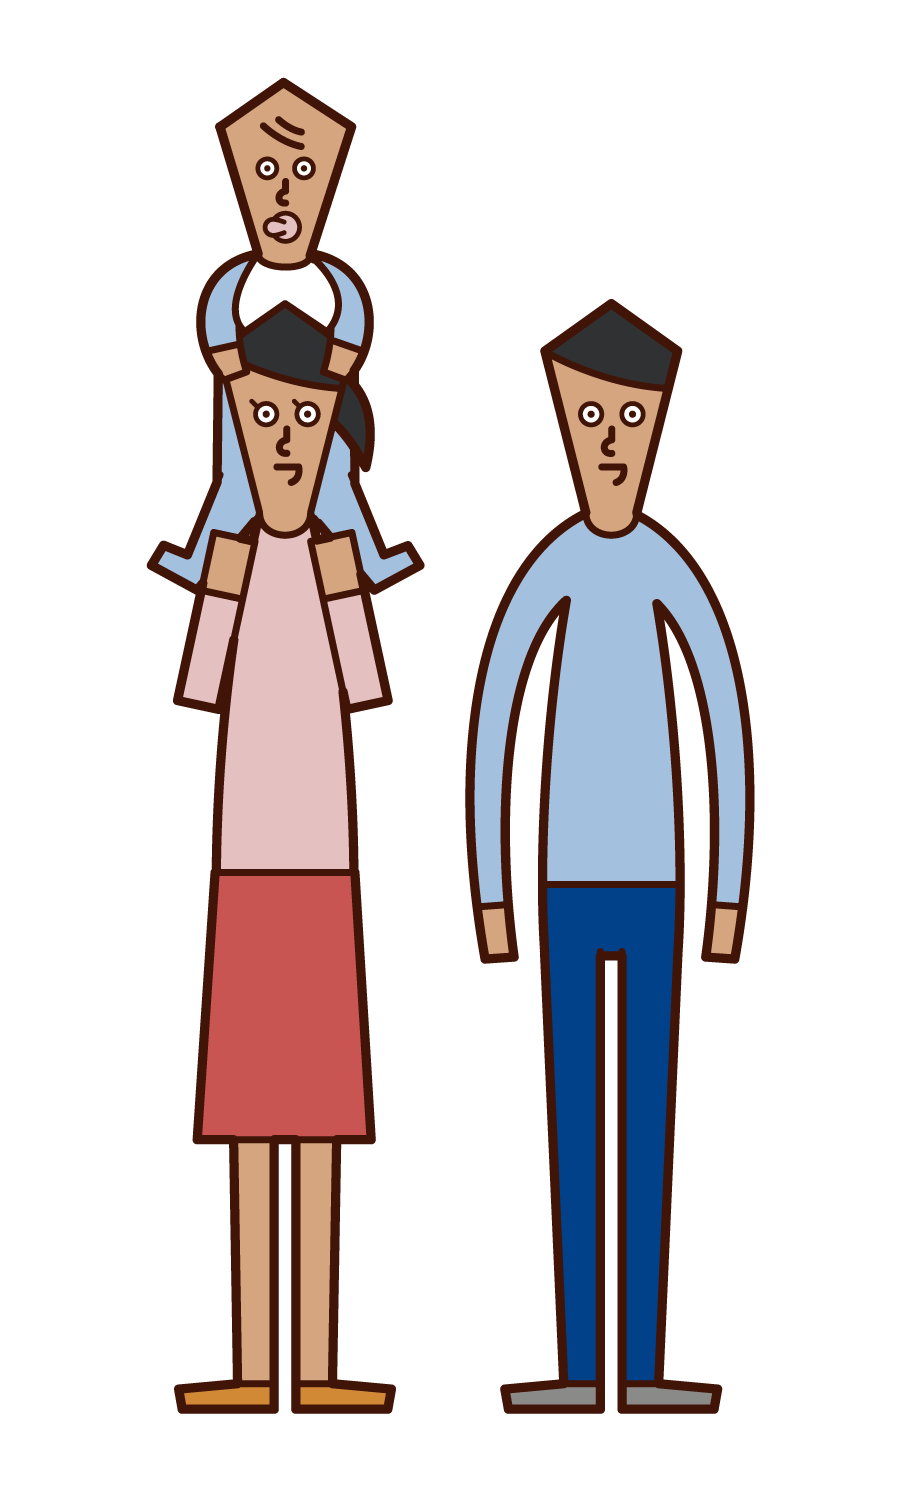 Illustration of a couple shouldering a child